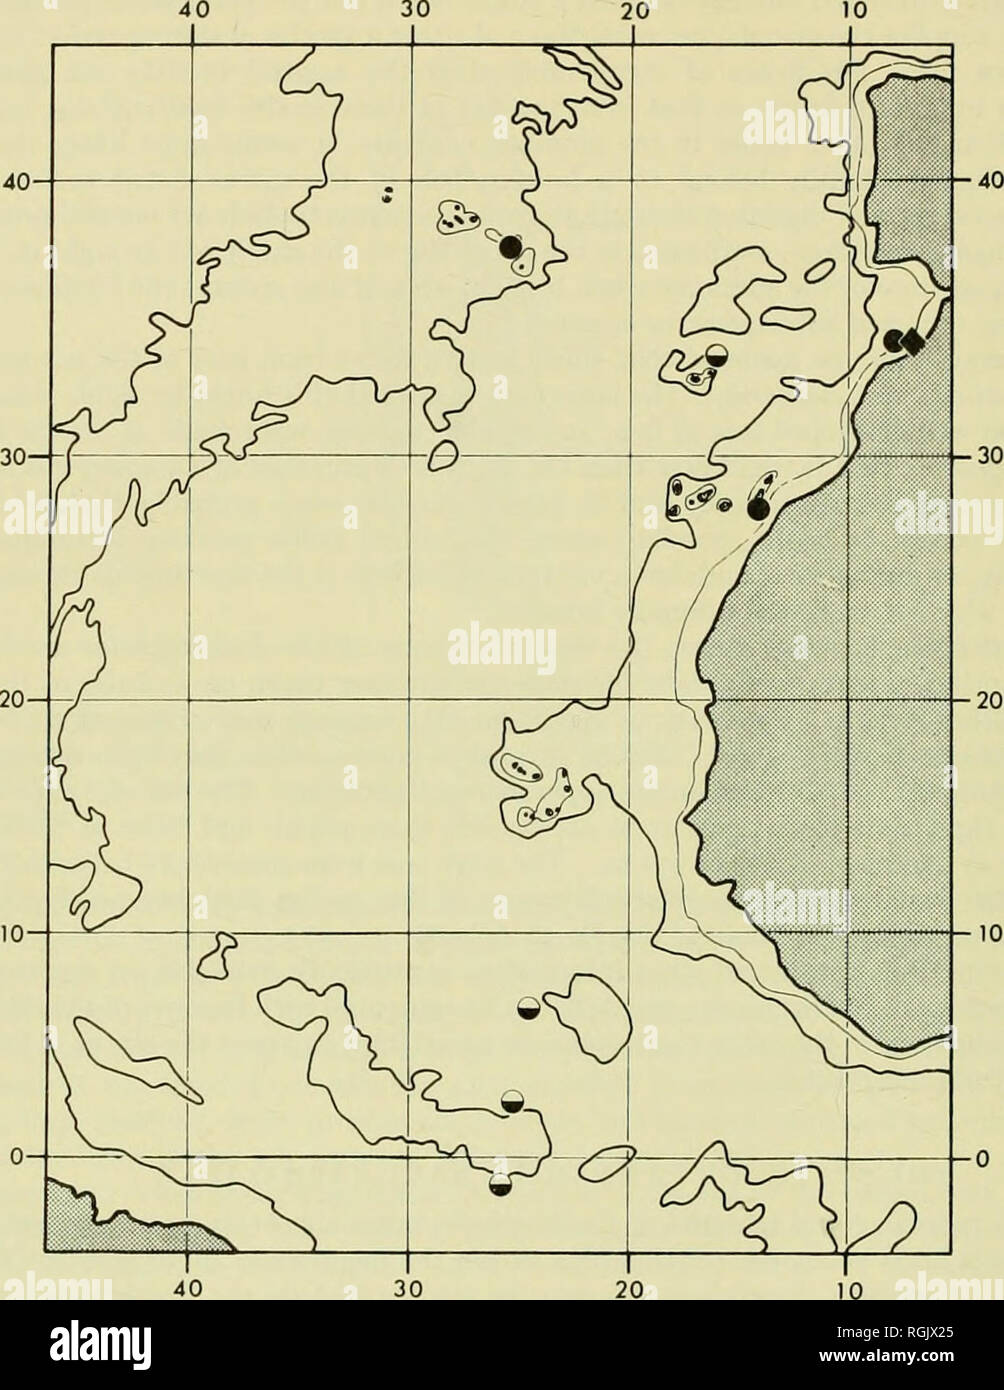 . Bulletin of the British Museum (Natural History). 198 C.M.H.HARRISSON&amp;G.PALMER. Fig. 6. Map of the central region of the eastern basin of the North Atlantic, showing stations at which specimens of R. elongattis are supposed to have been taken. ? = 1917 holotype which coincides with the solid disc indicating the collection position of the &quot; Discovery &quot; neotype. • = the two smaller &quot; Discovery &quot; specimens. © = &quot; Walter Herwig &quot; stations for unsorted taeniosome material believed to be R. elongatus (Krefft in litt.). Shaded areas indicate land. 100 and 2,000 fm. Stock Photo